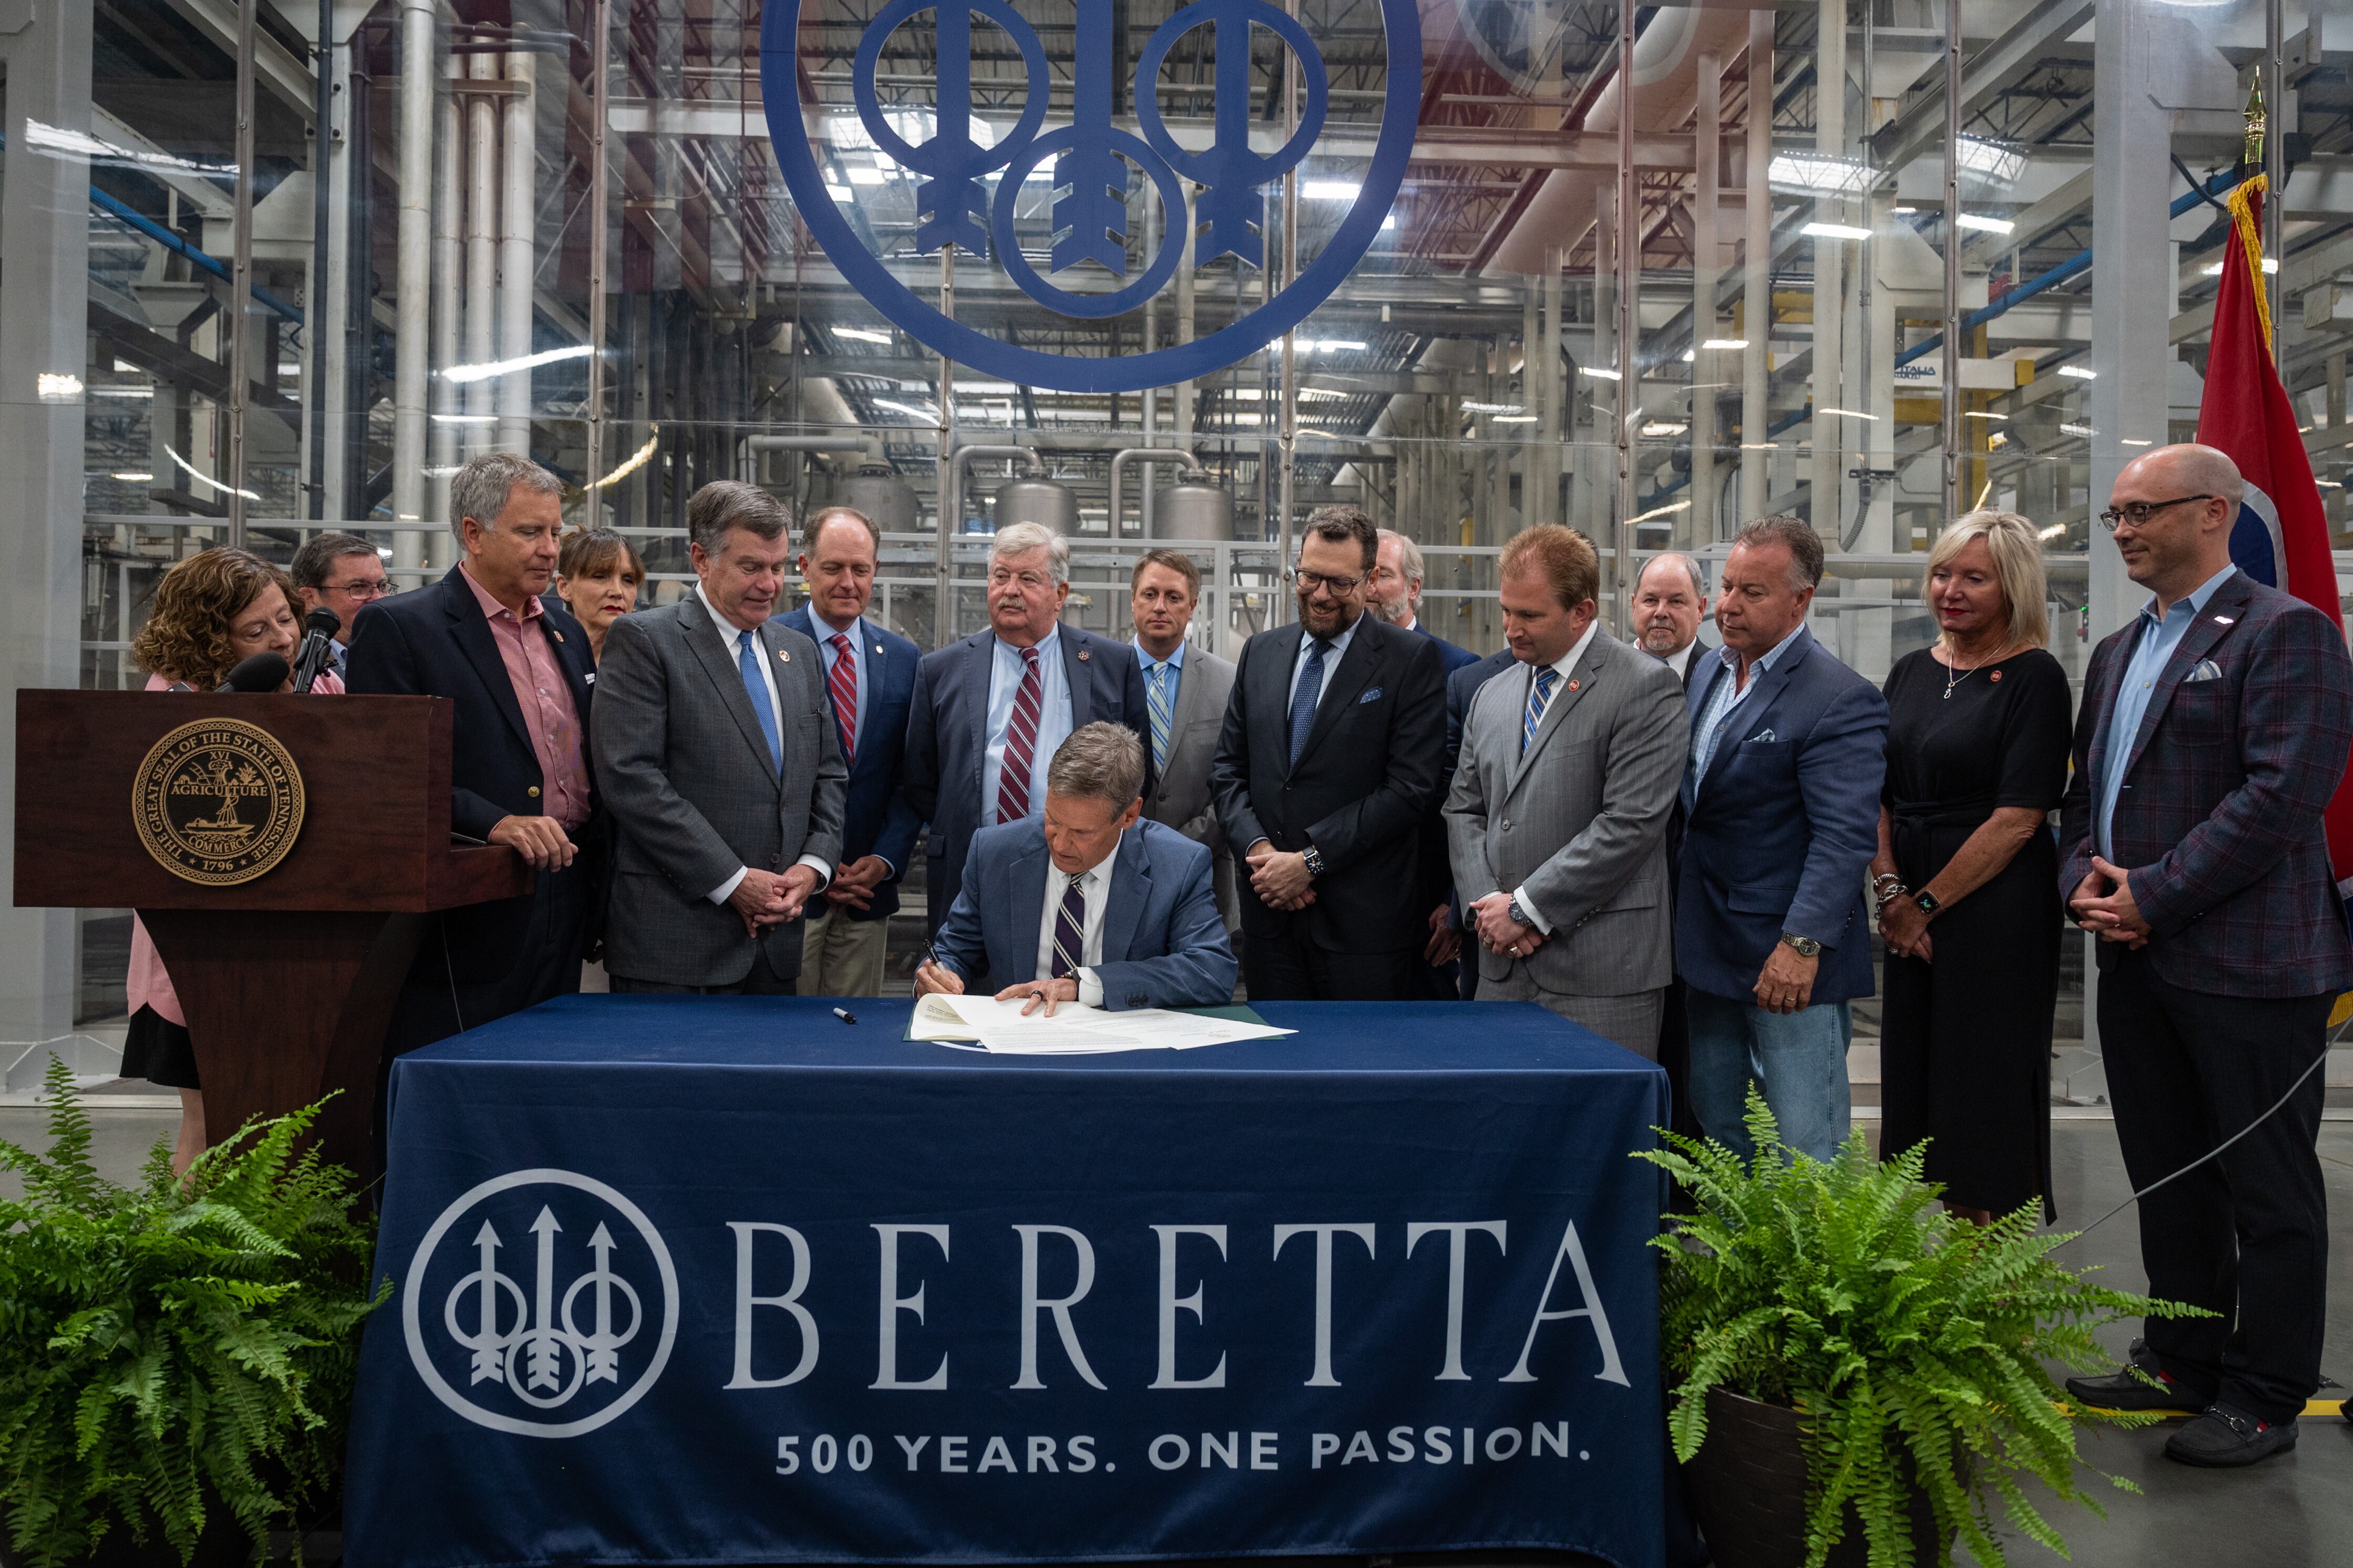 A man wearing a suit signs a document inside of a large manufacturing plant and surrounded by a dozen other people wearing suits and dresses.